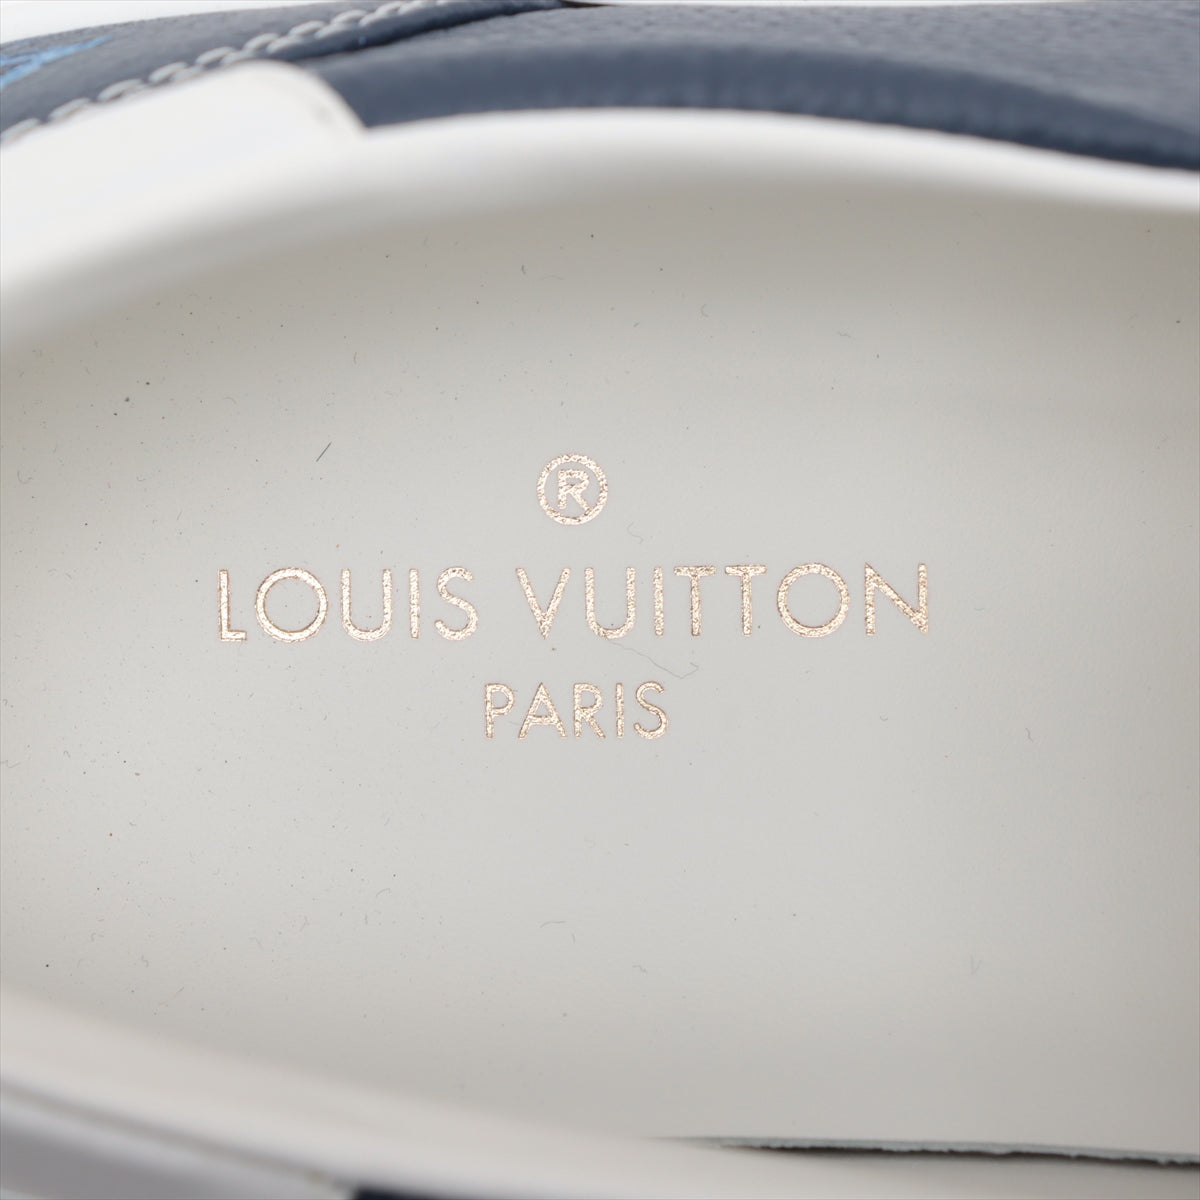 Louis Vuitton LV Original Line 21 Year PVC  Leather Slippon 5  Navyx × White LD0211 Monogram Insole Marked Family Selling Goods